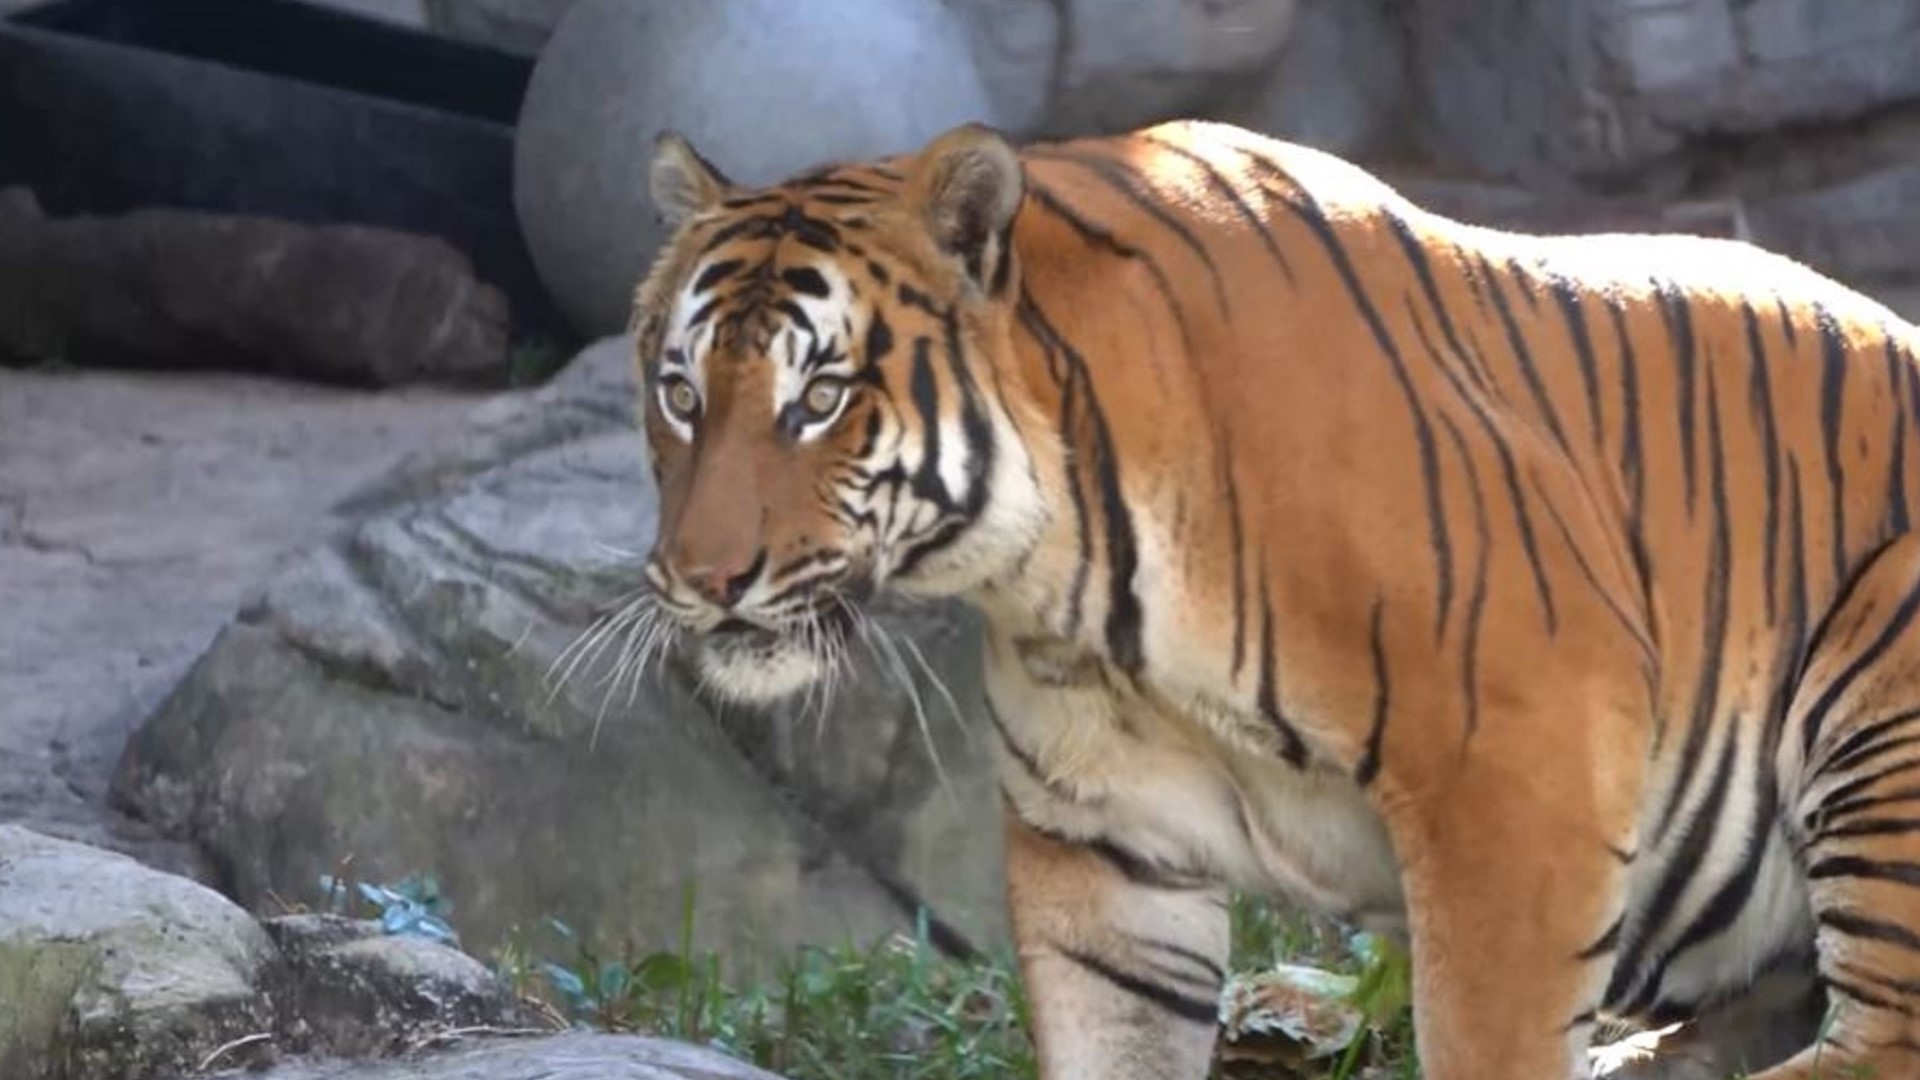 A 16-year-old tiger and a 7-year-old tiger were tested by the medical care team after they were "exhibiting mild respiratory symptoms," zoo leaders explained.